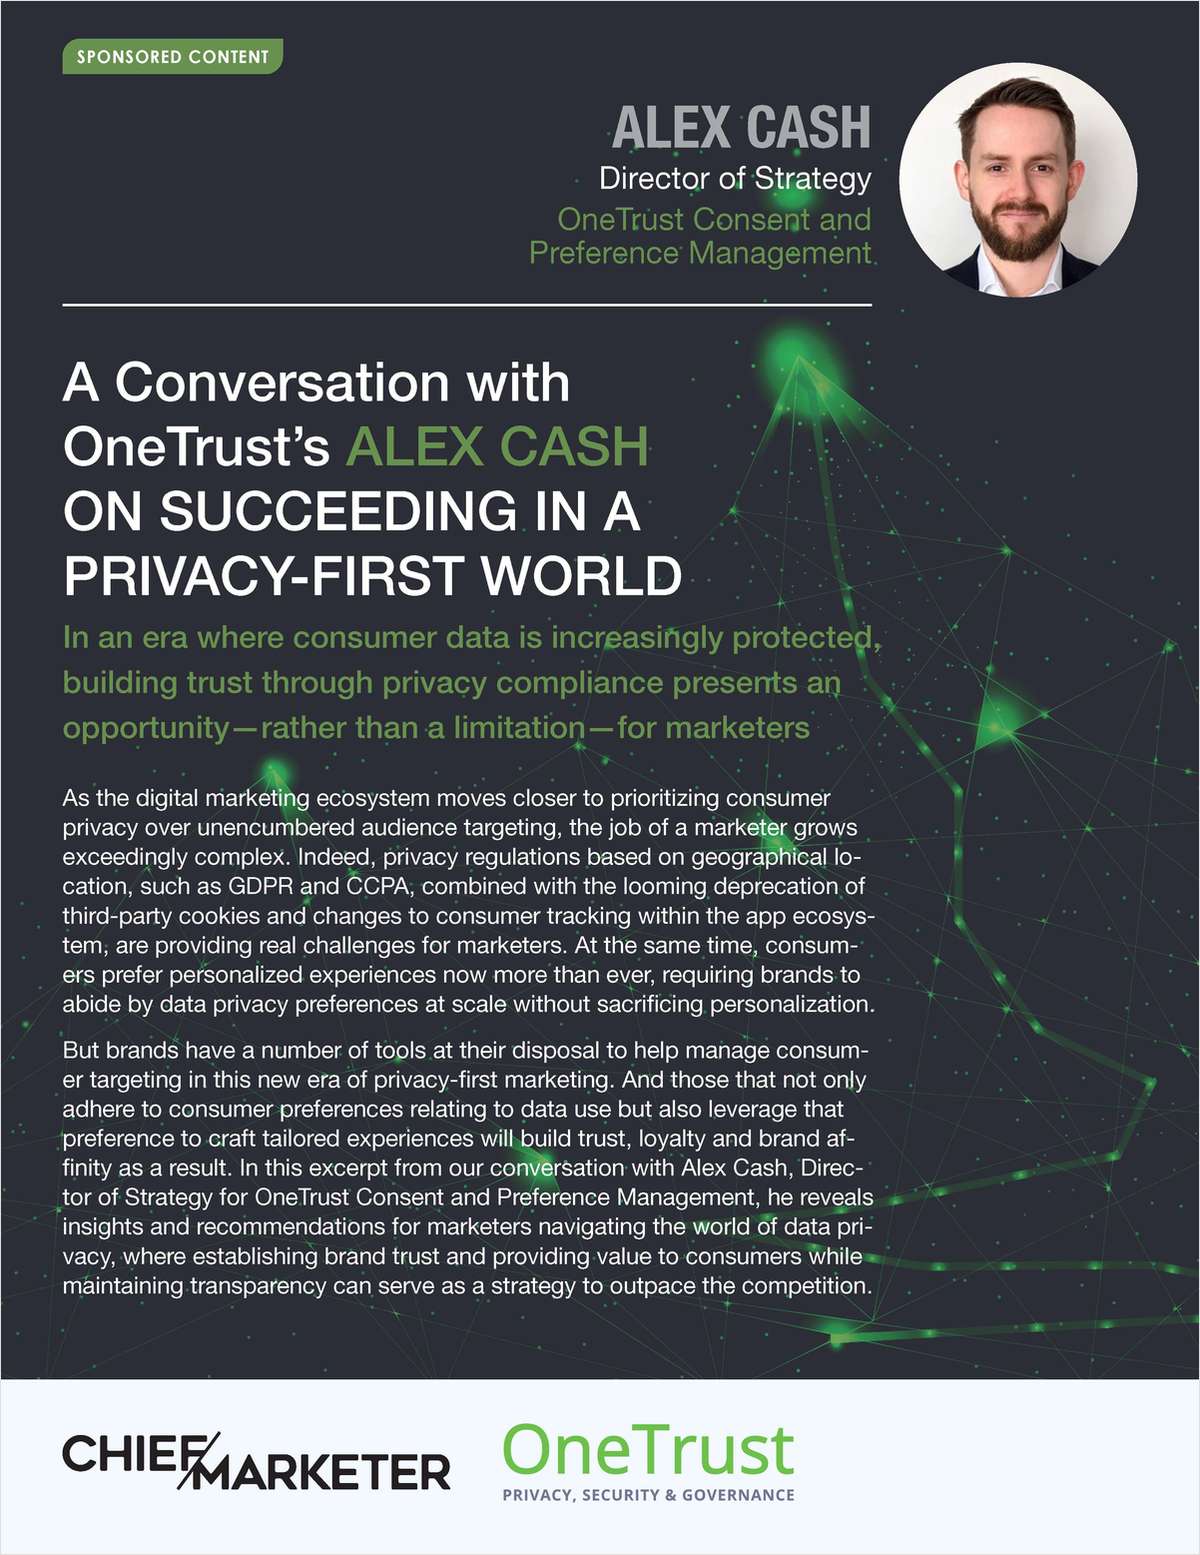 A CONVERSATION WITH ONETRUST'S ALEX CASH ON SUCCEEDING IN A PRIVACY-FIRST WORLD